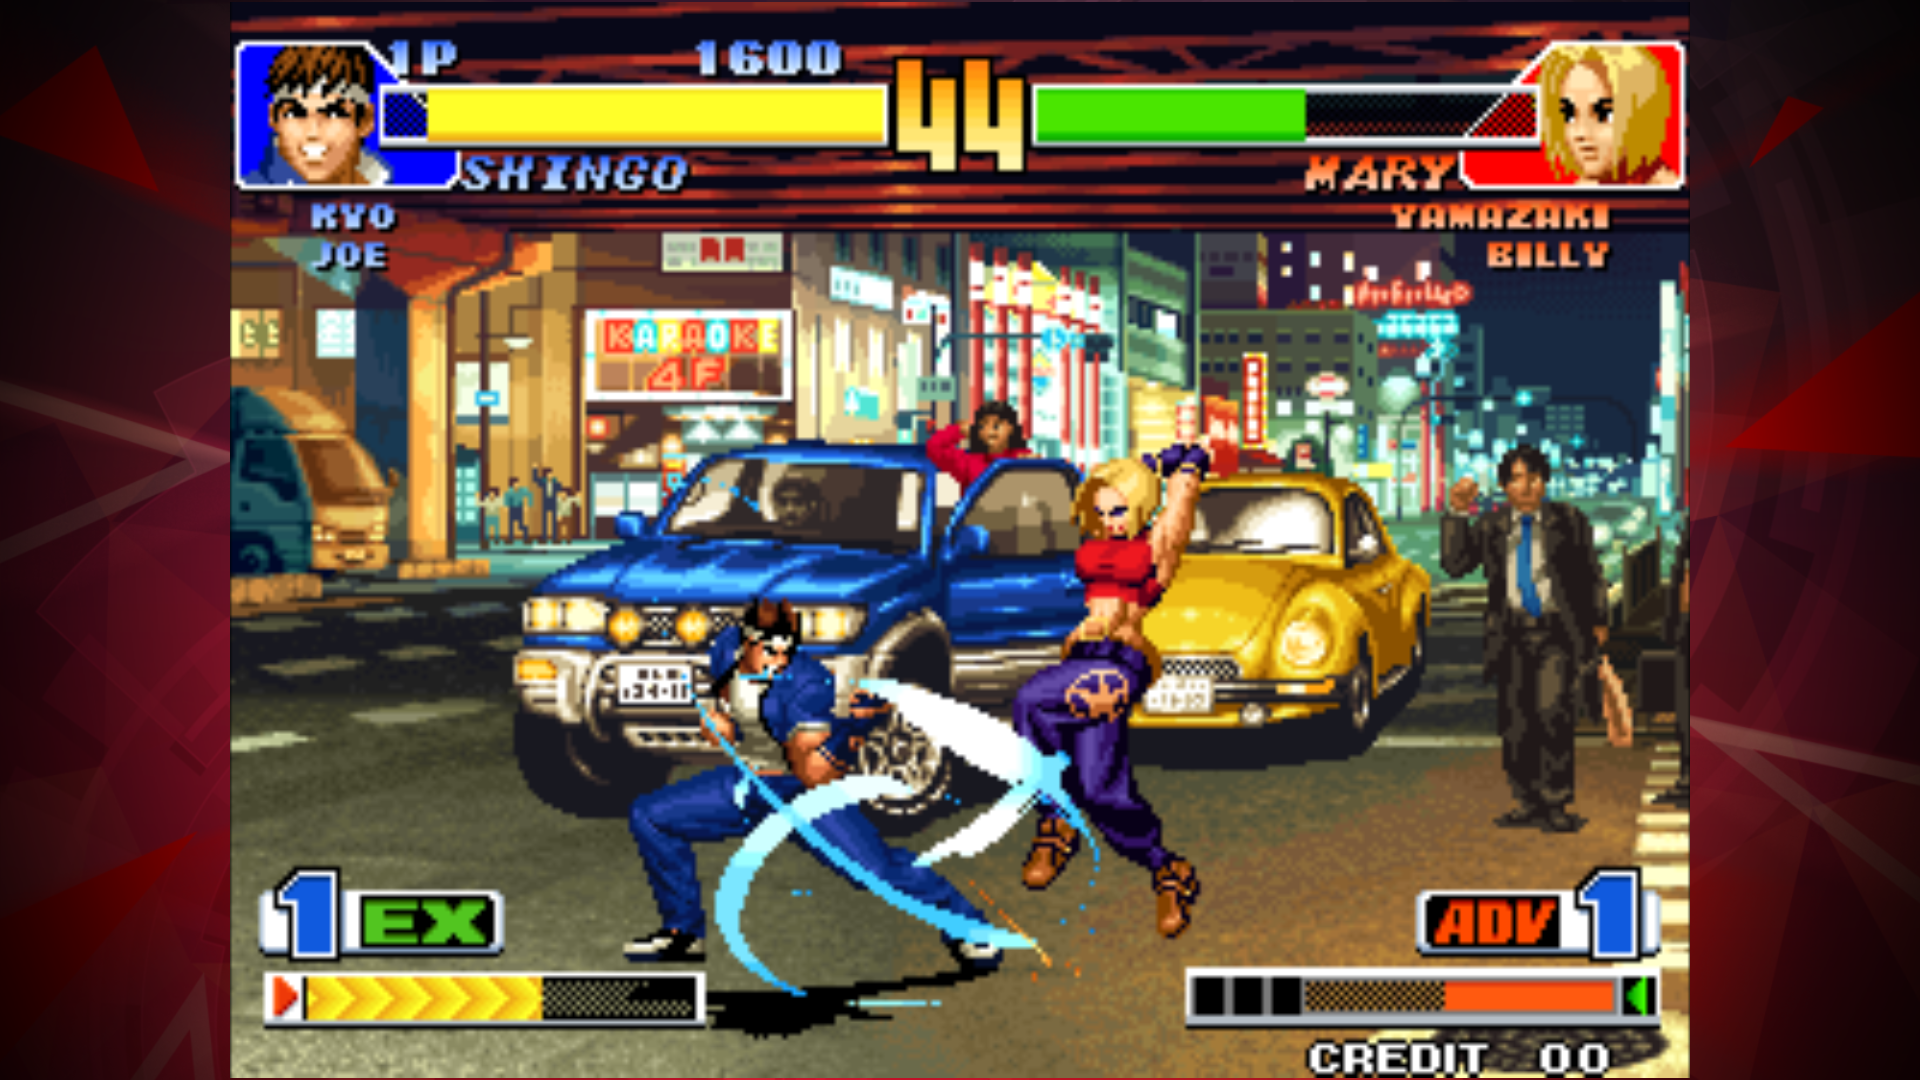 1998-Released Legendary Fighting Game 'The King of Fighters 98' ACA NeoGeo  From SNK and Hamster Is Out Now on iOS and Android – TouchArcade